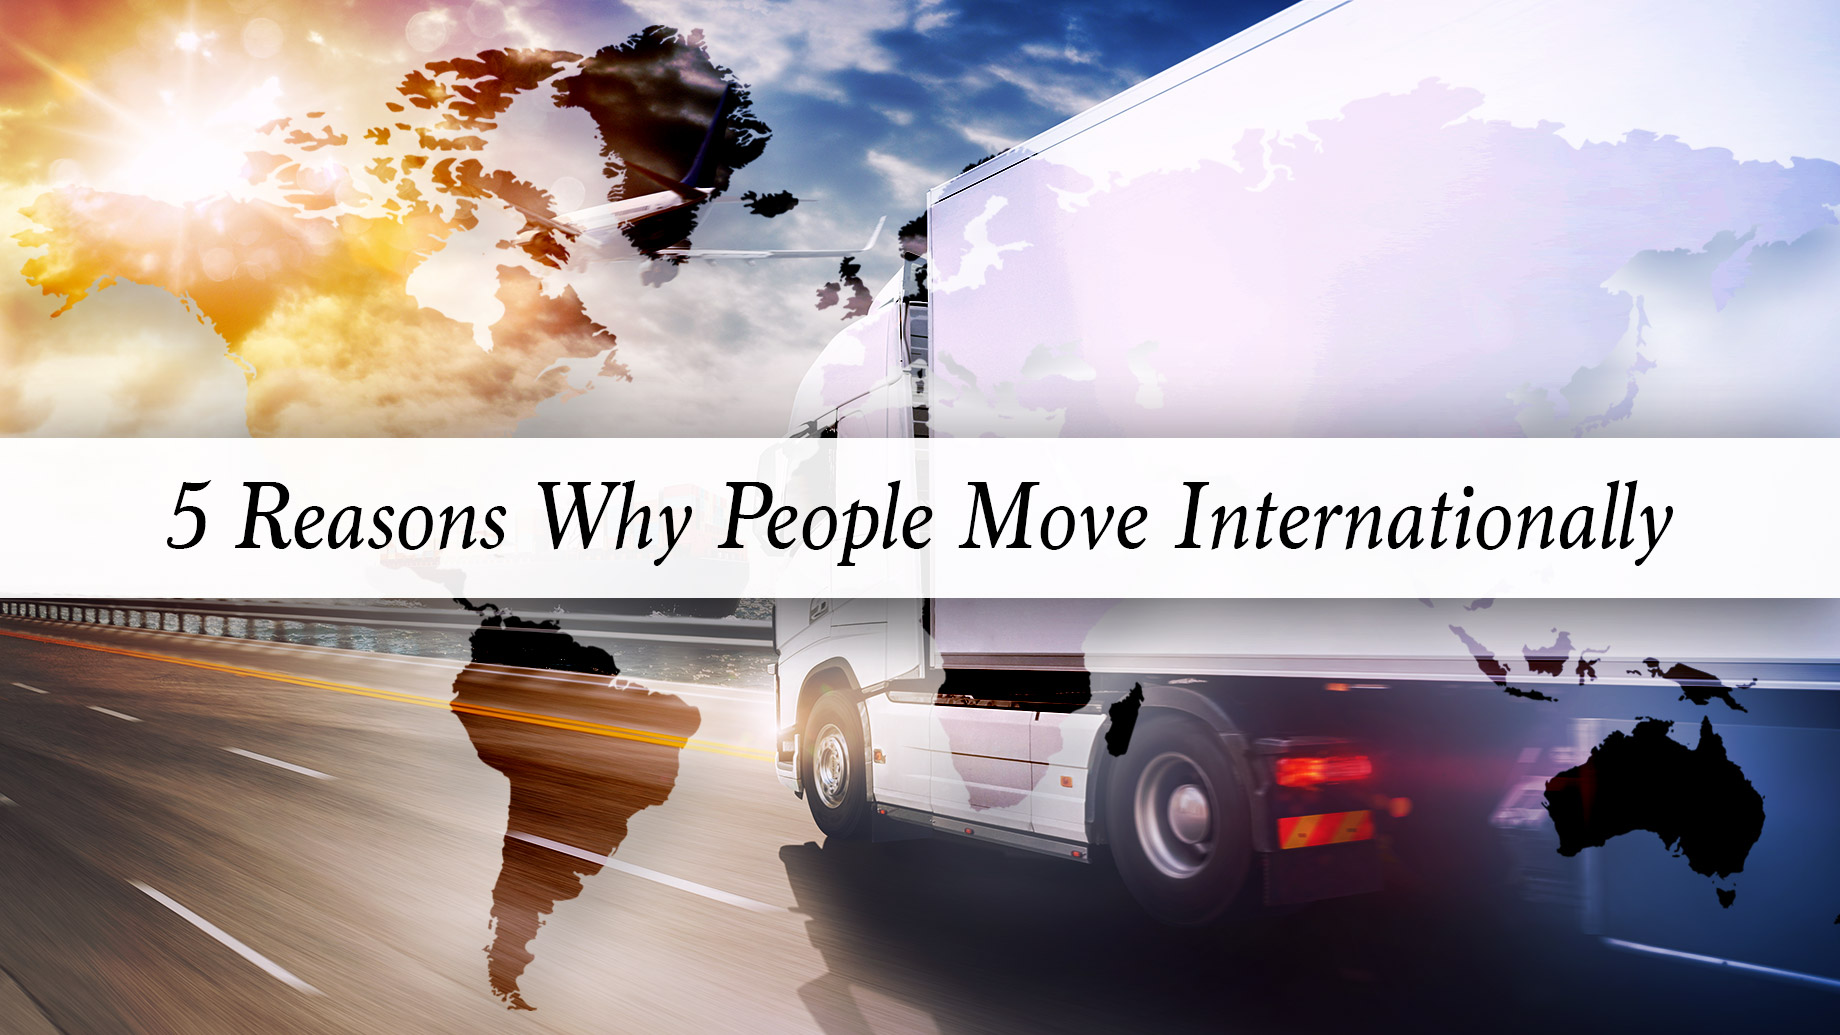 5 Reasons Why People Move Internationally